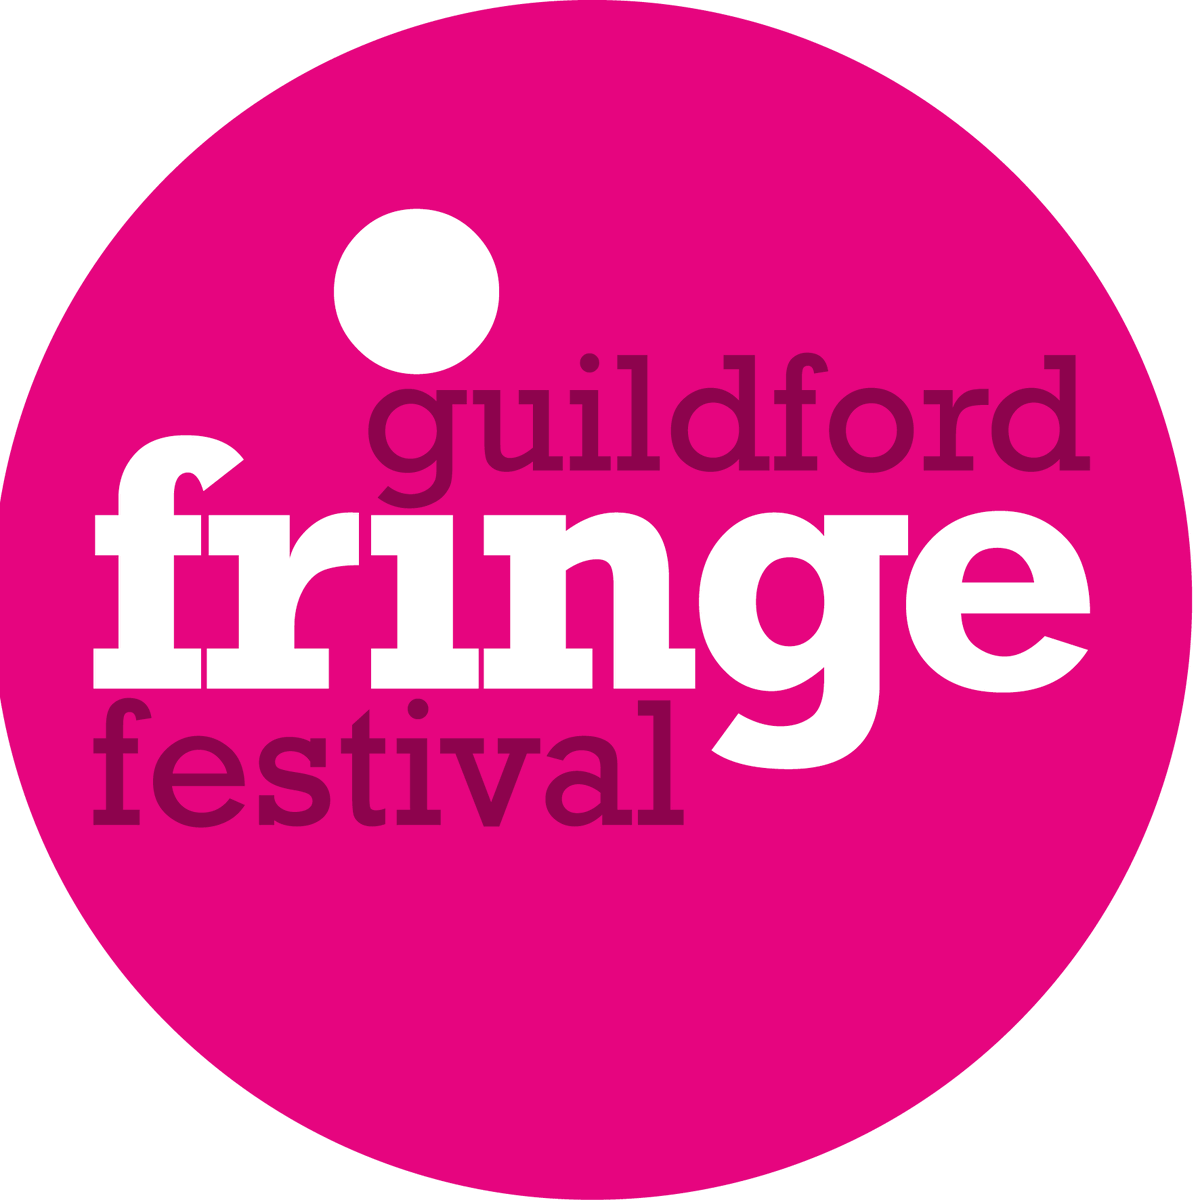 Guildford Fringe Festival tickets are on sale now - check out the fantastic line up for 2024, including events here at The Keep! We are open from 5pm today. guildfordfringefestival.com